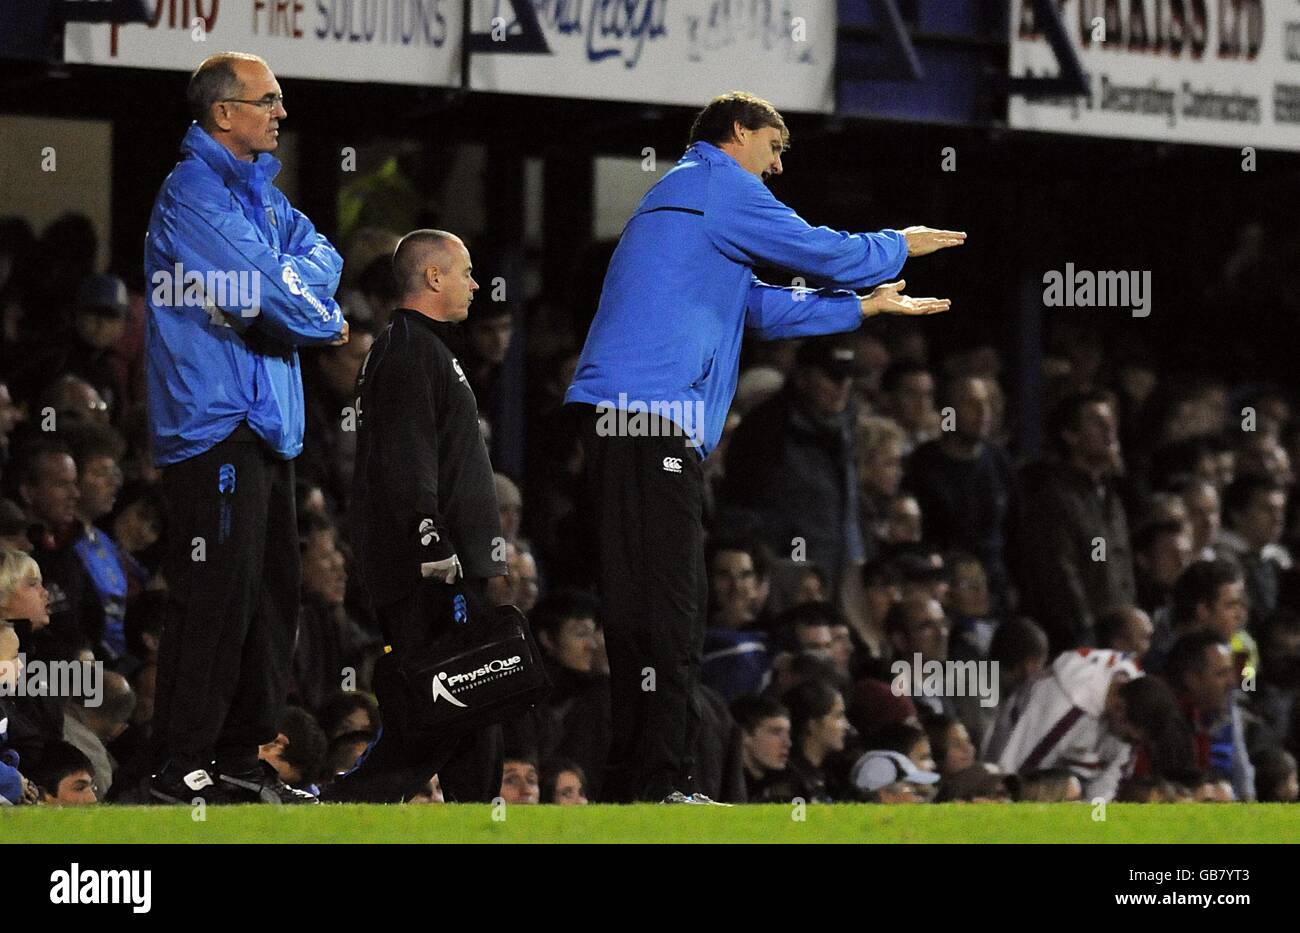 Soccer - Barclays Premier League - Portsmouth v Fulham - Fratton Park. Portsmouth assistant manager Joe Jordan (left) and assisntant manager Tony Adams, on the touchline during the match. Stock Photo